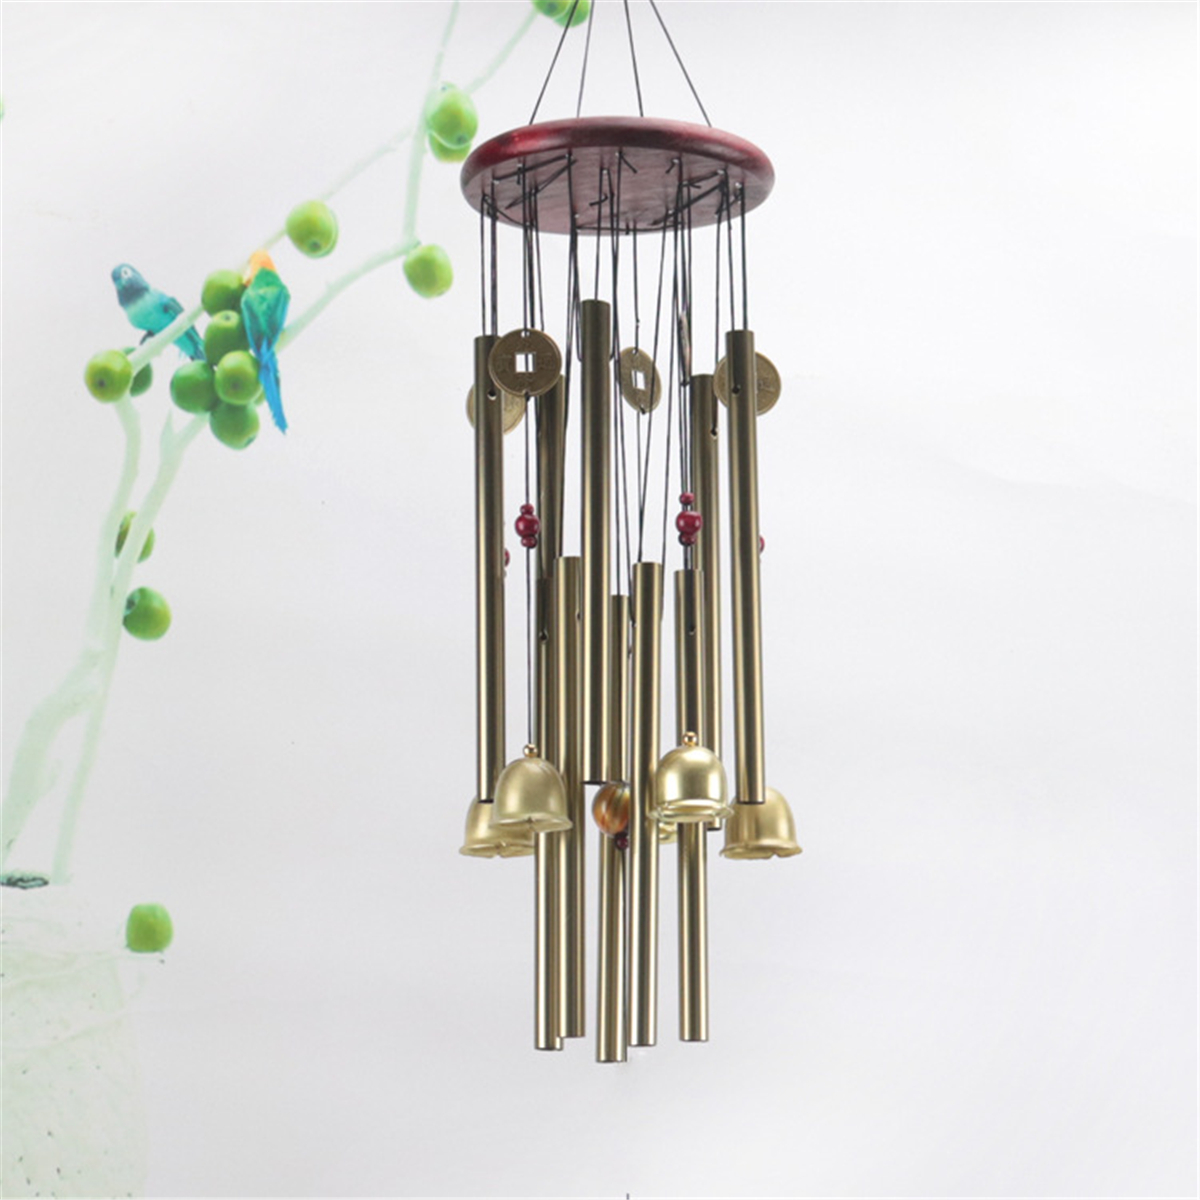 Wind-Chimes-Large-Tone-Resonant-Bell-10-Tubes-Chapel-Church-Garden-Decor-33quot-1694339-2